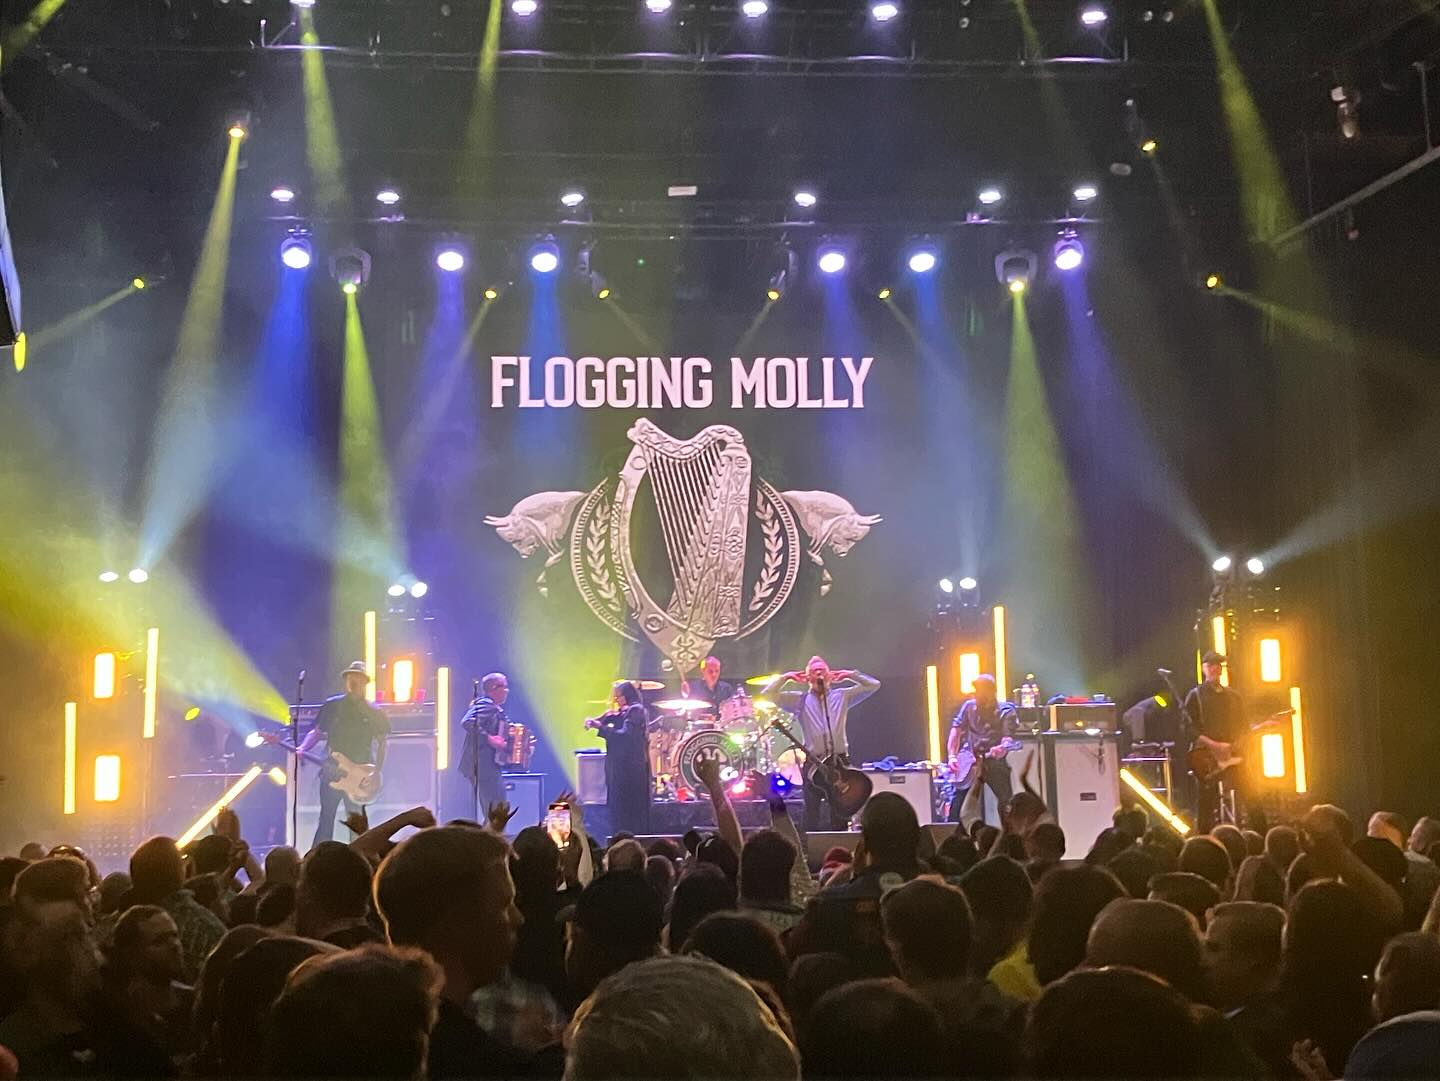 CHAUVET Professional Helps Peter Therrien Set St Paddys Tone on Flogging Molly Tour